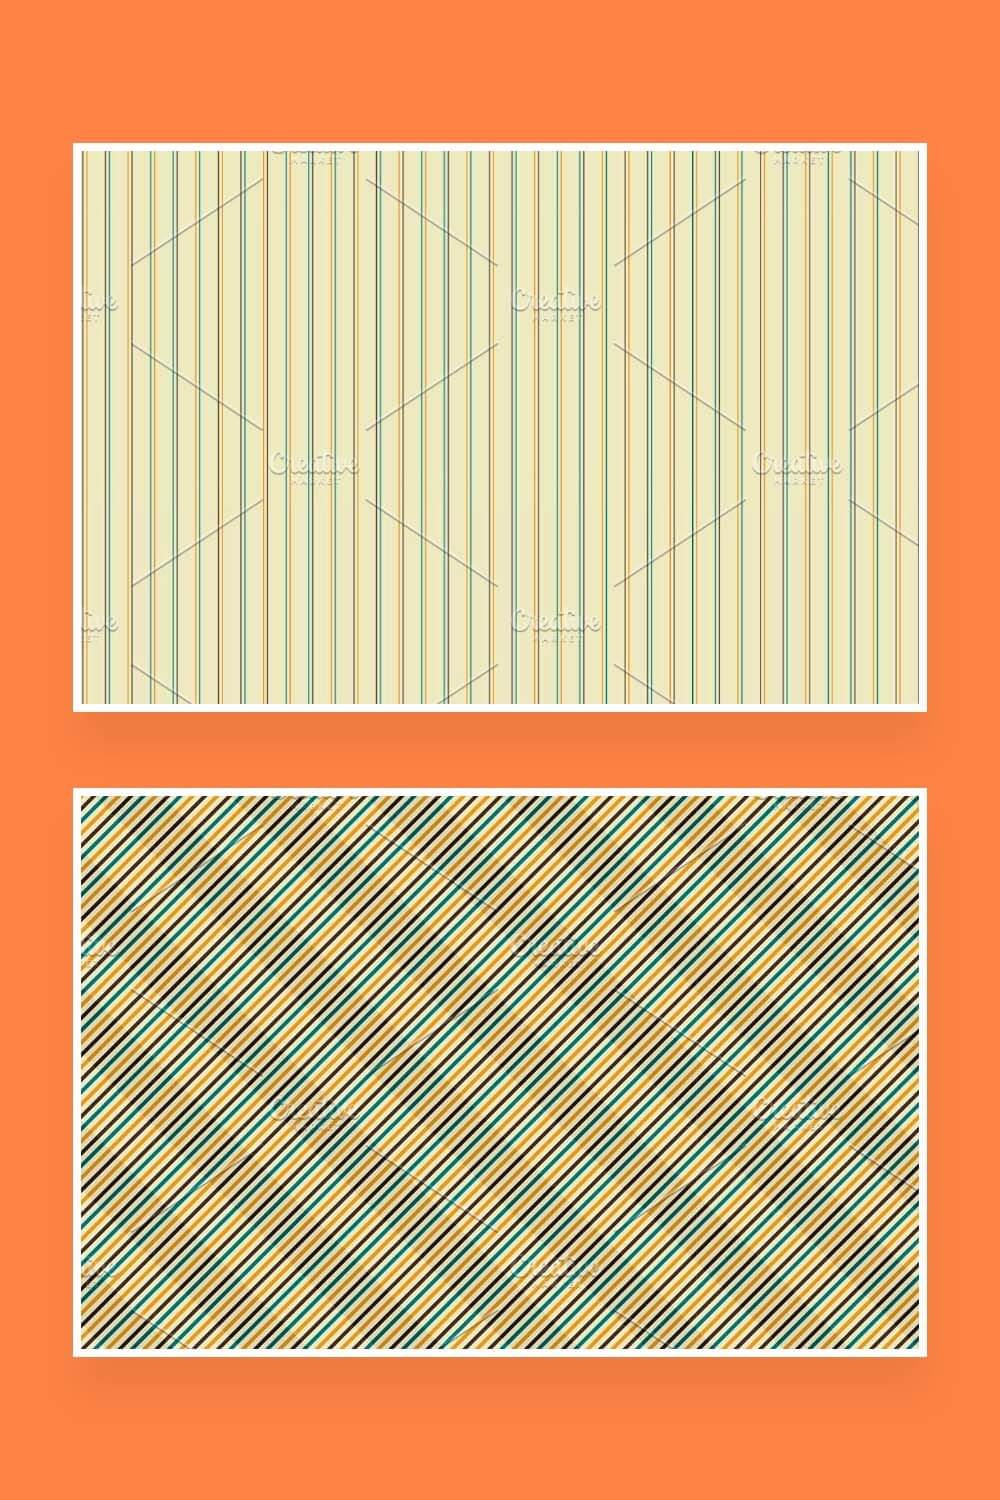 Two images with seamless retro patterns vertical thin lines and oblique multicolored lines.